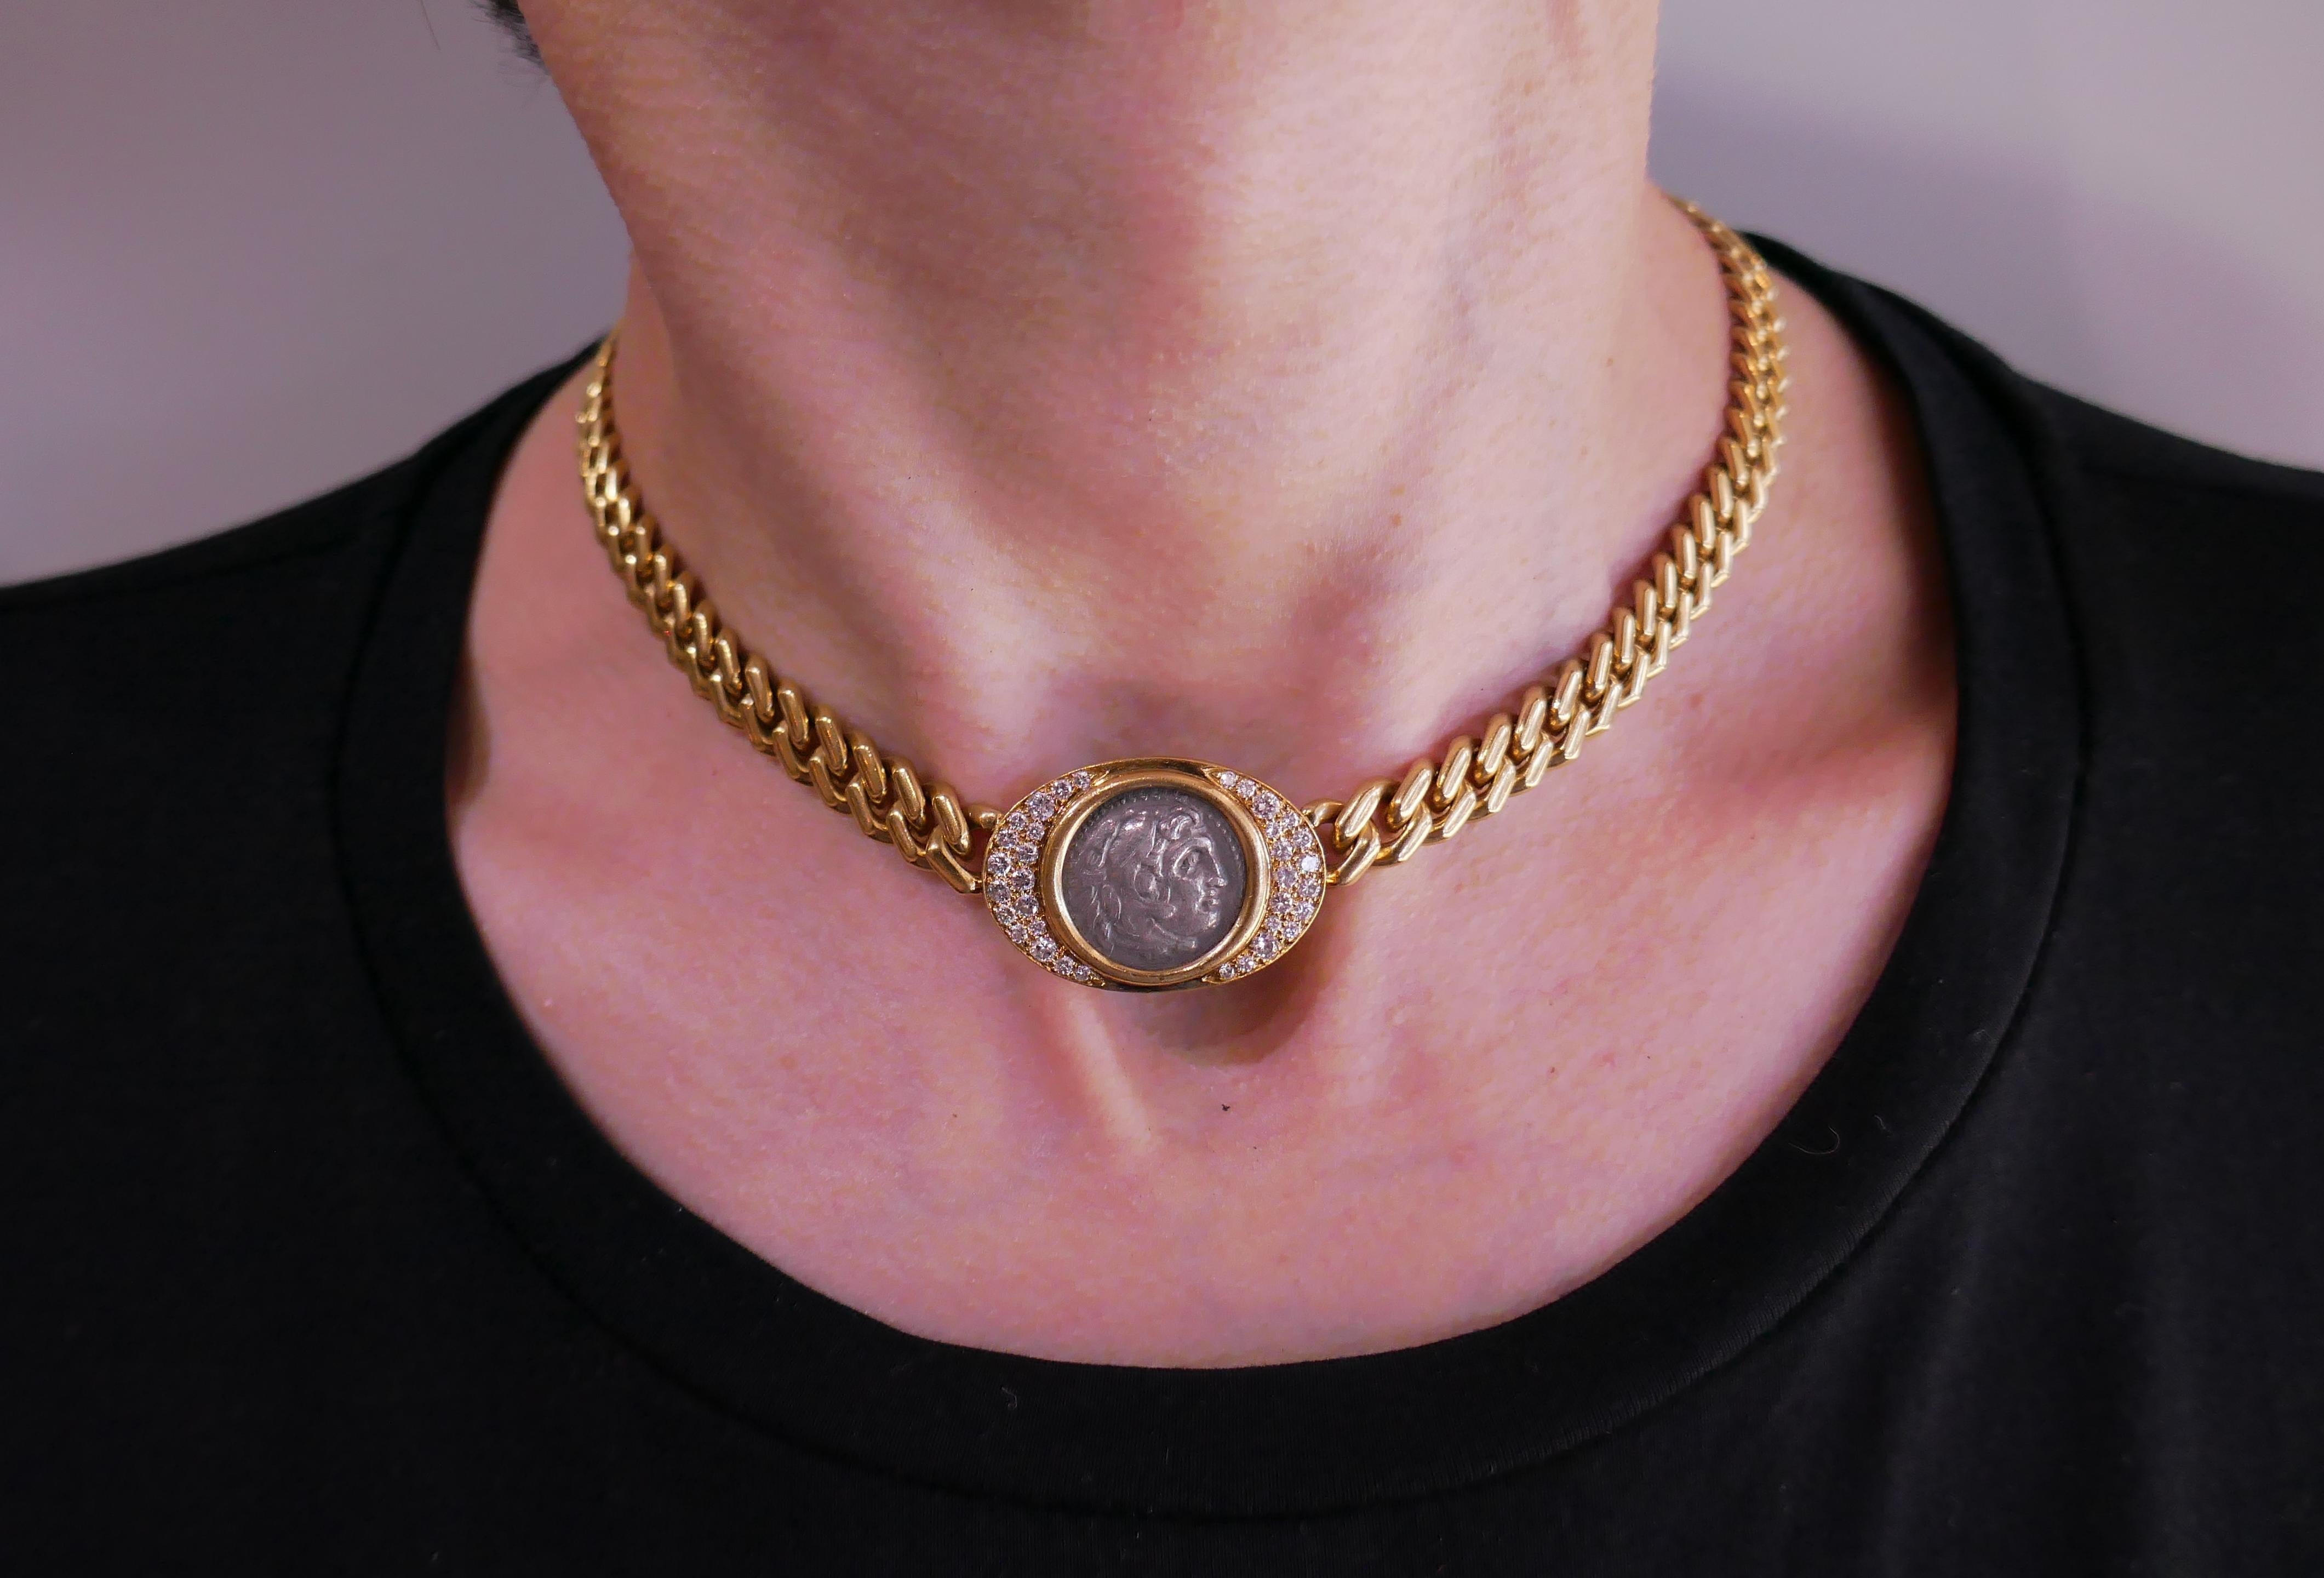 Signature Bulgari coin necklace from Monete Collection. Bold, elegant and wearable, the necklace is a great addition to your jewelry collection.
The necklace is made of 18 karat yellow gold and features an ancient Roman coin dated 336-323 A.C.